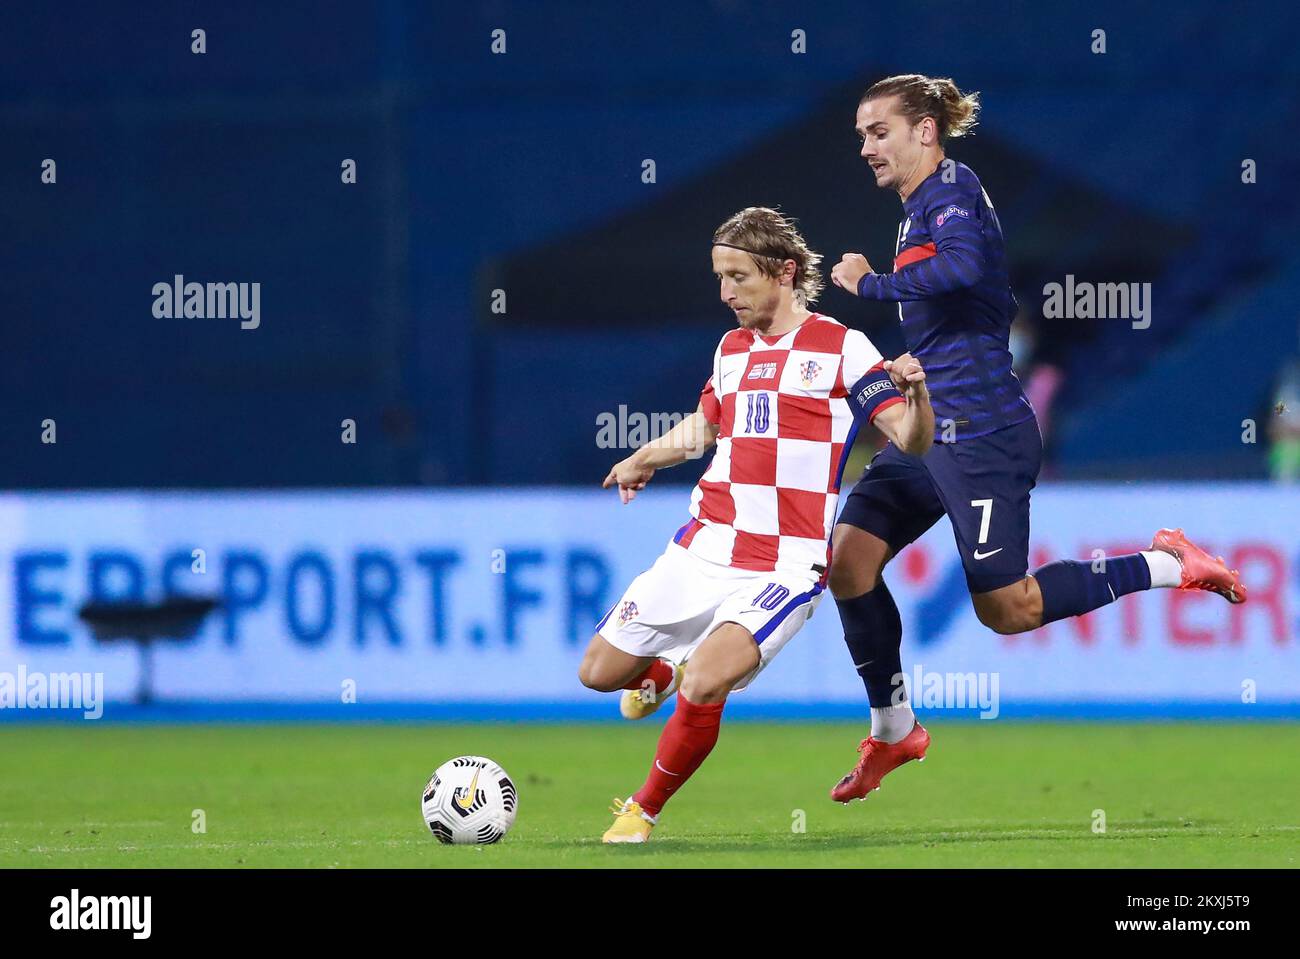 Antoine Griezmann of France and Luka Modric of Croatia during the UEFA Nations League group stage between Croatia and France at Maksimir Stadium on October 14, 2020 in Zagreb, Croatia.